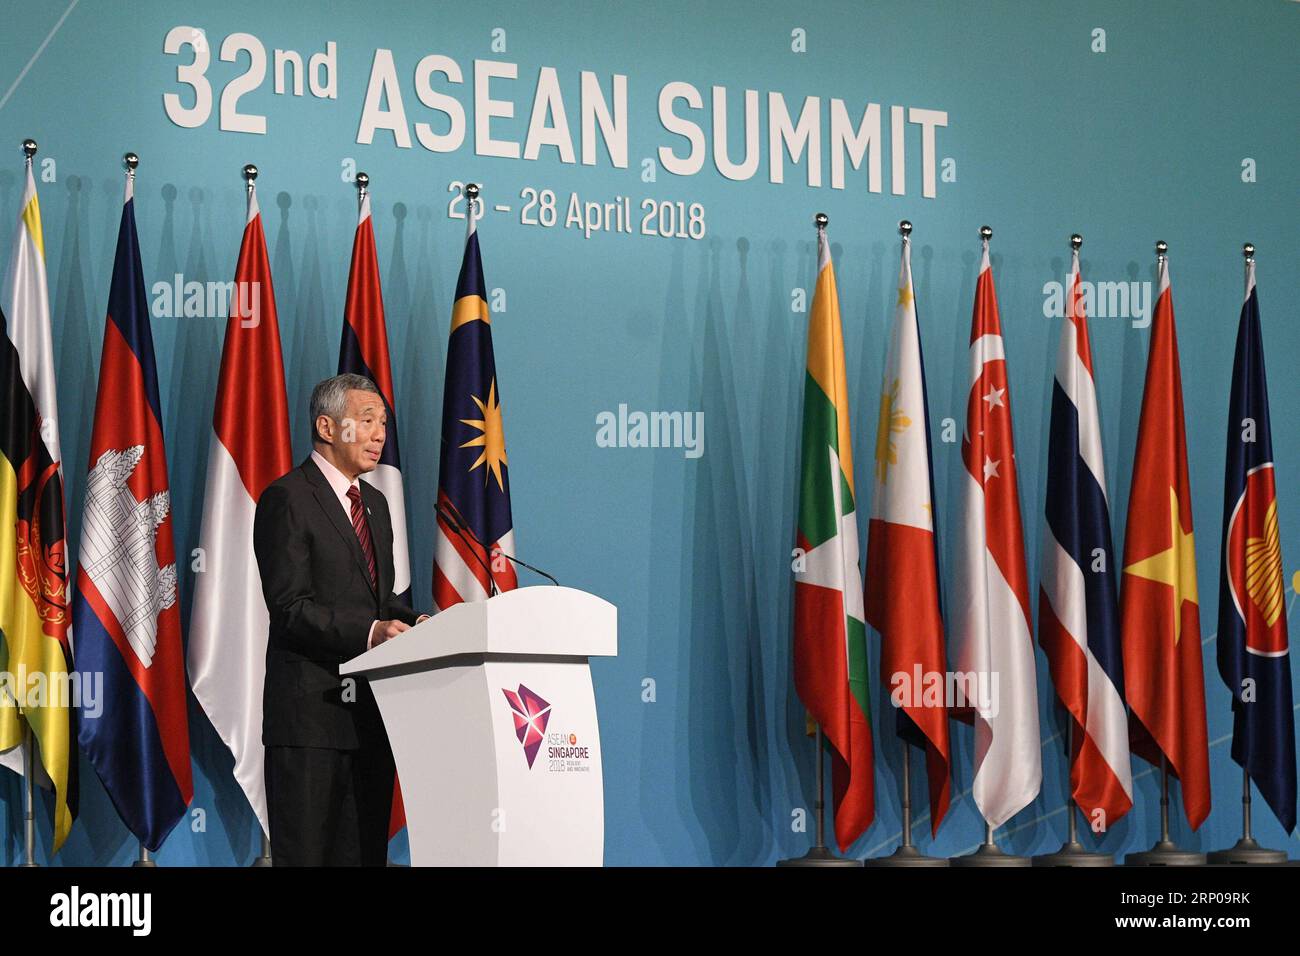 (180428) -- SINGAPORE, April 28, 2018 -- Singapore s Prime Minister Lee Hsien Loong speaks during a press conference of the 32nd ASEAN Summit held in Singapore on April 28, 2018. The 32nd summit of the Association of Southeast Asian Nations (ASEAN) concluded here Saturday, reaffirming the bloc s cooperation and common vision. ) (srb) SINGAPORE-ASEAN-SUMMIT-PRESS CONFERENCE ThenxChihxWey PUBLICATIONxNOTxINxCHN Stock Photo